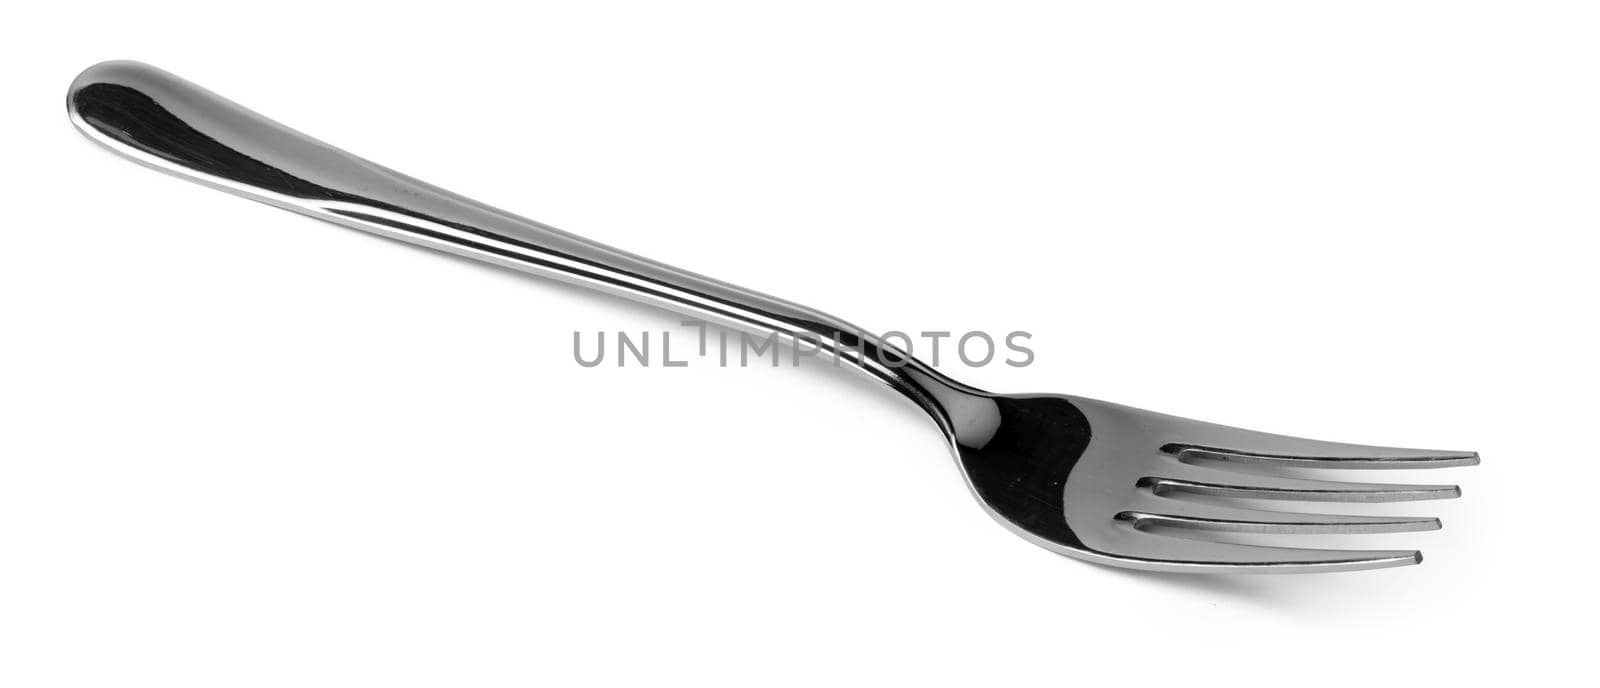 Silver dining fork isolated on white background close up